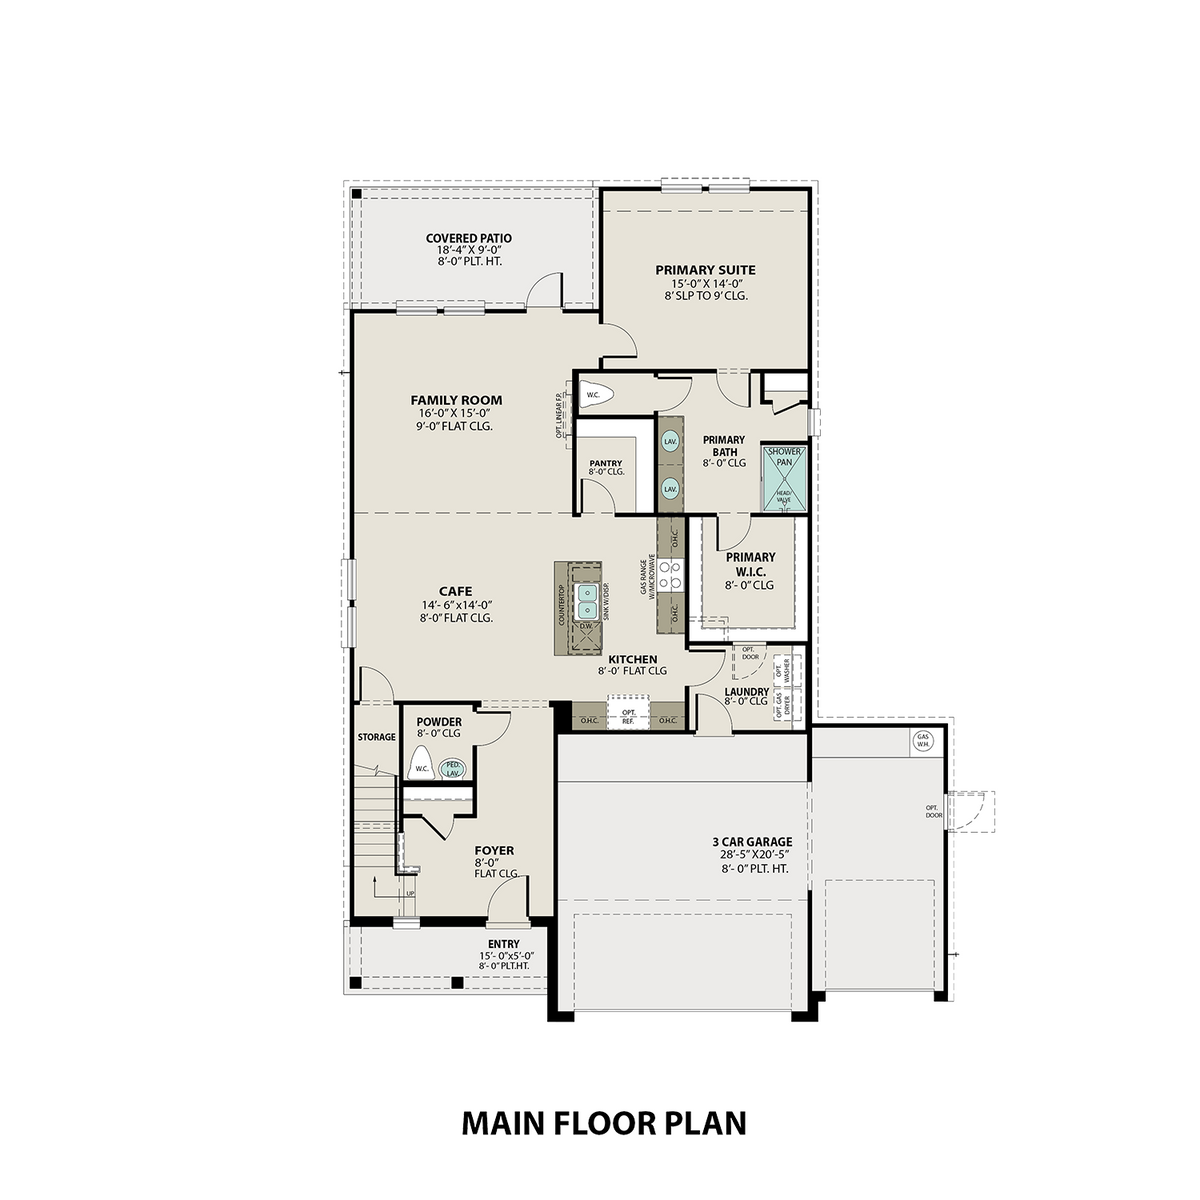 1 - The Tierra B with 3-Car Garage floor plan layout for 19 Wichita Trail in Davidson Homes' River Ranch Meadows community.